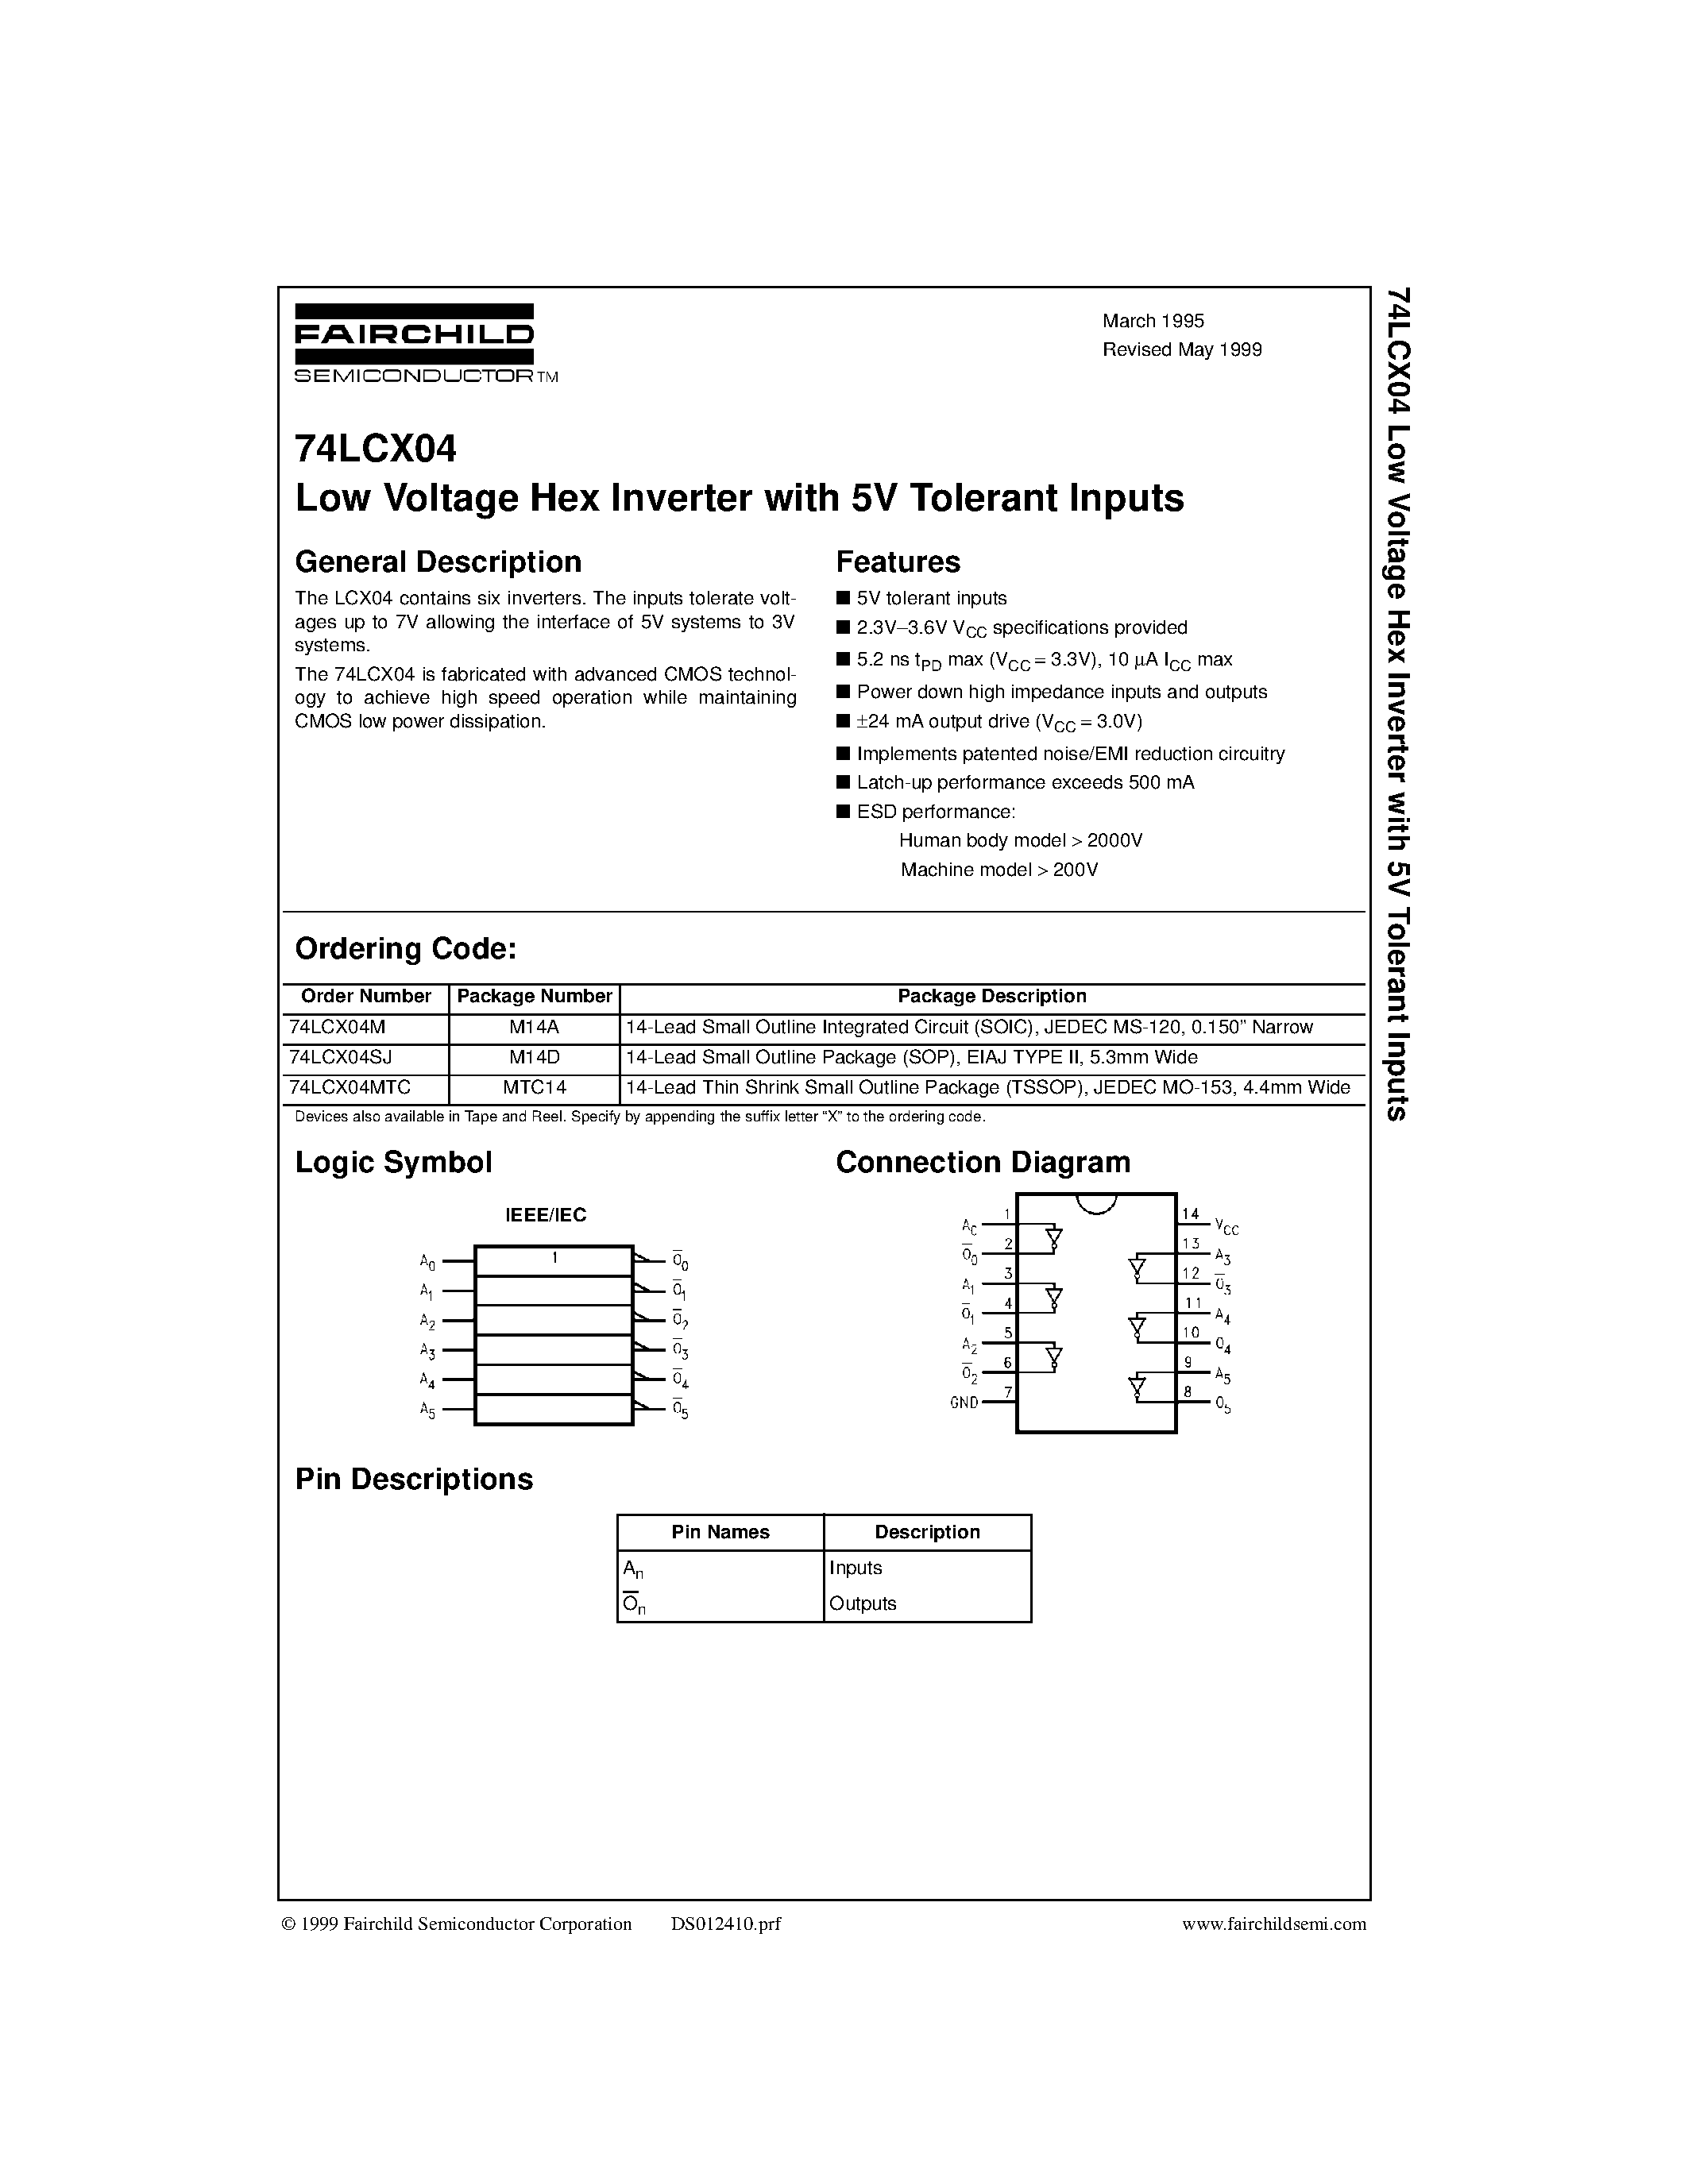 Datasheet 74LCX04M - Low Voltage Hex Inverter with 5V Tolerant Inputs page 1